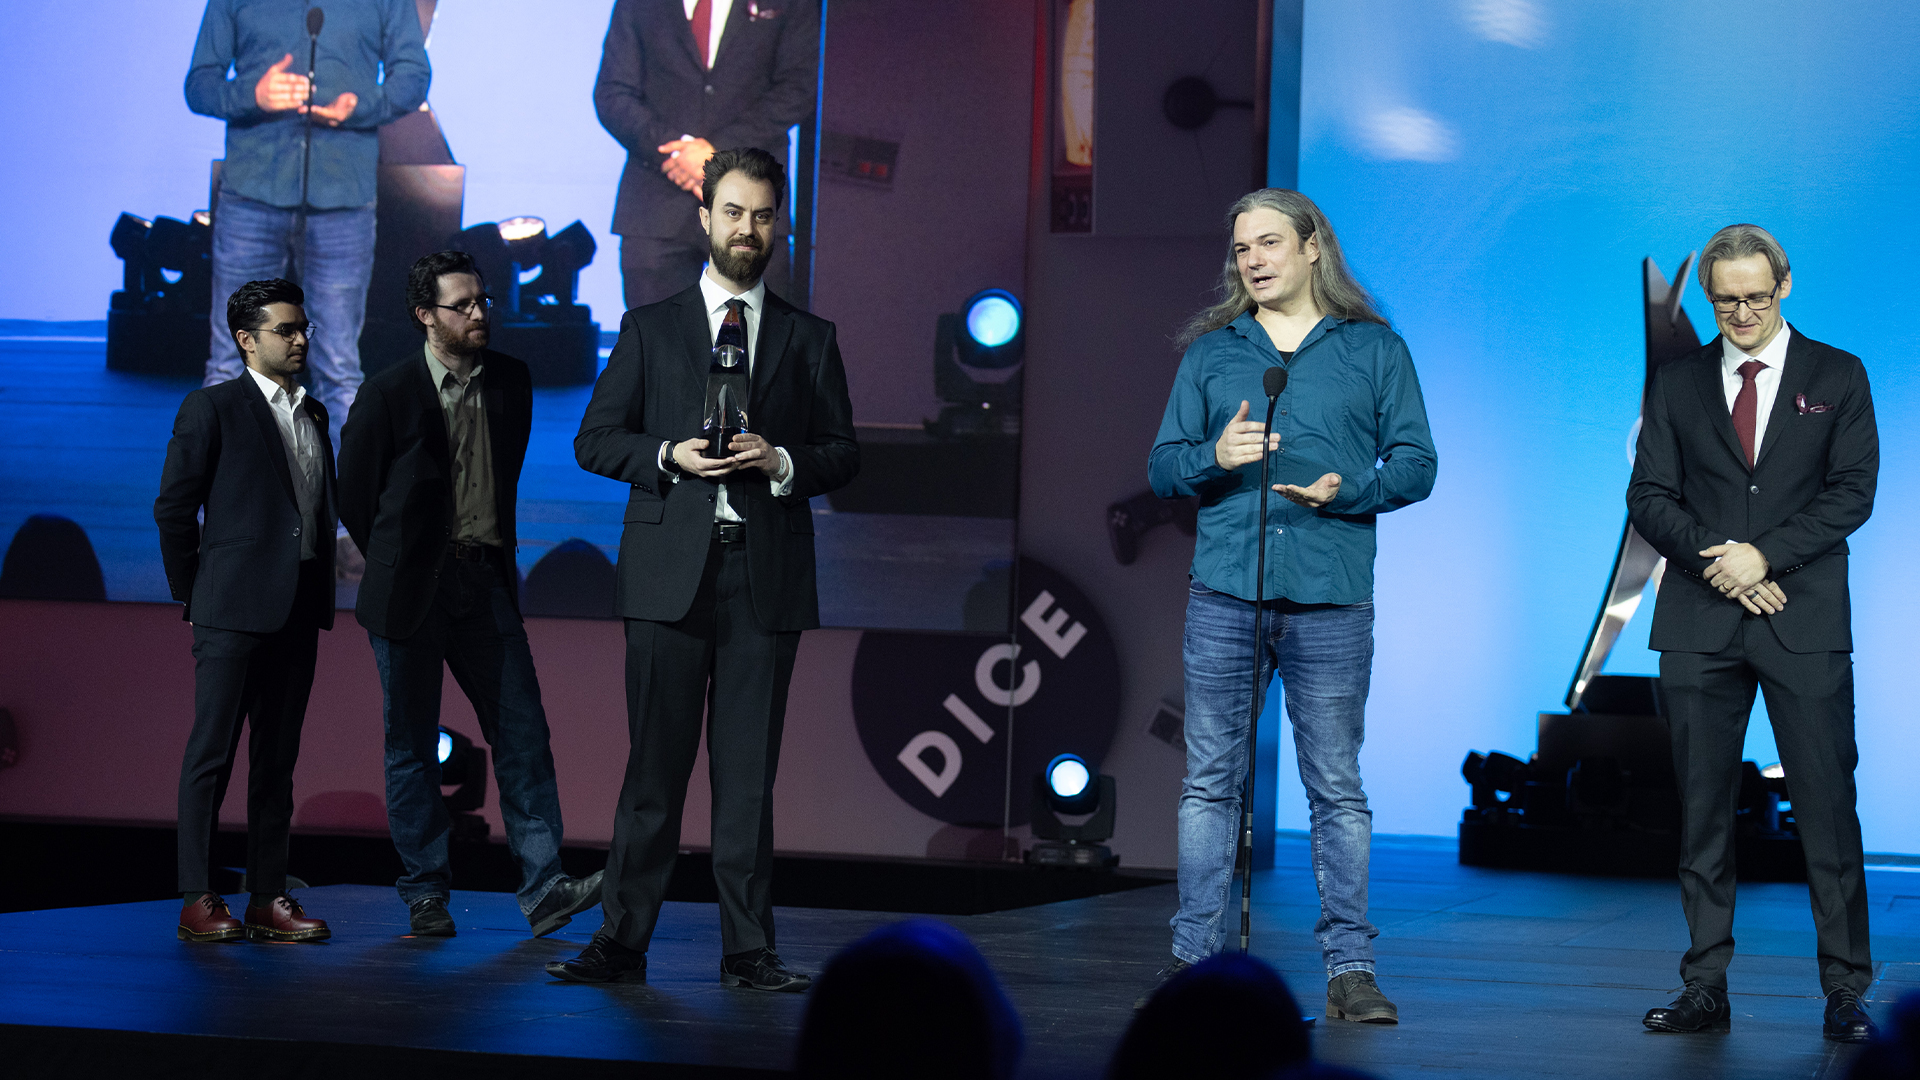 DICE Summit a chance for game creators to recharge, reflect